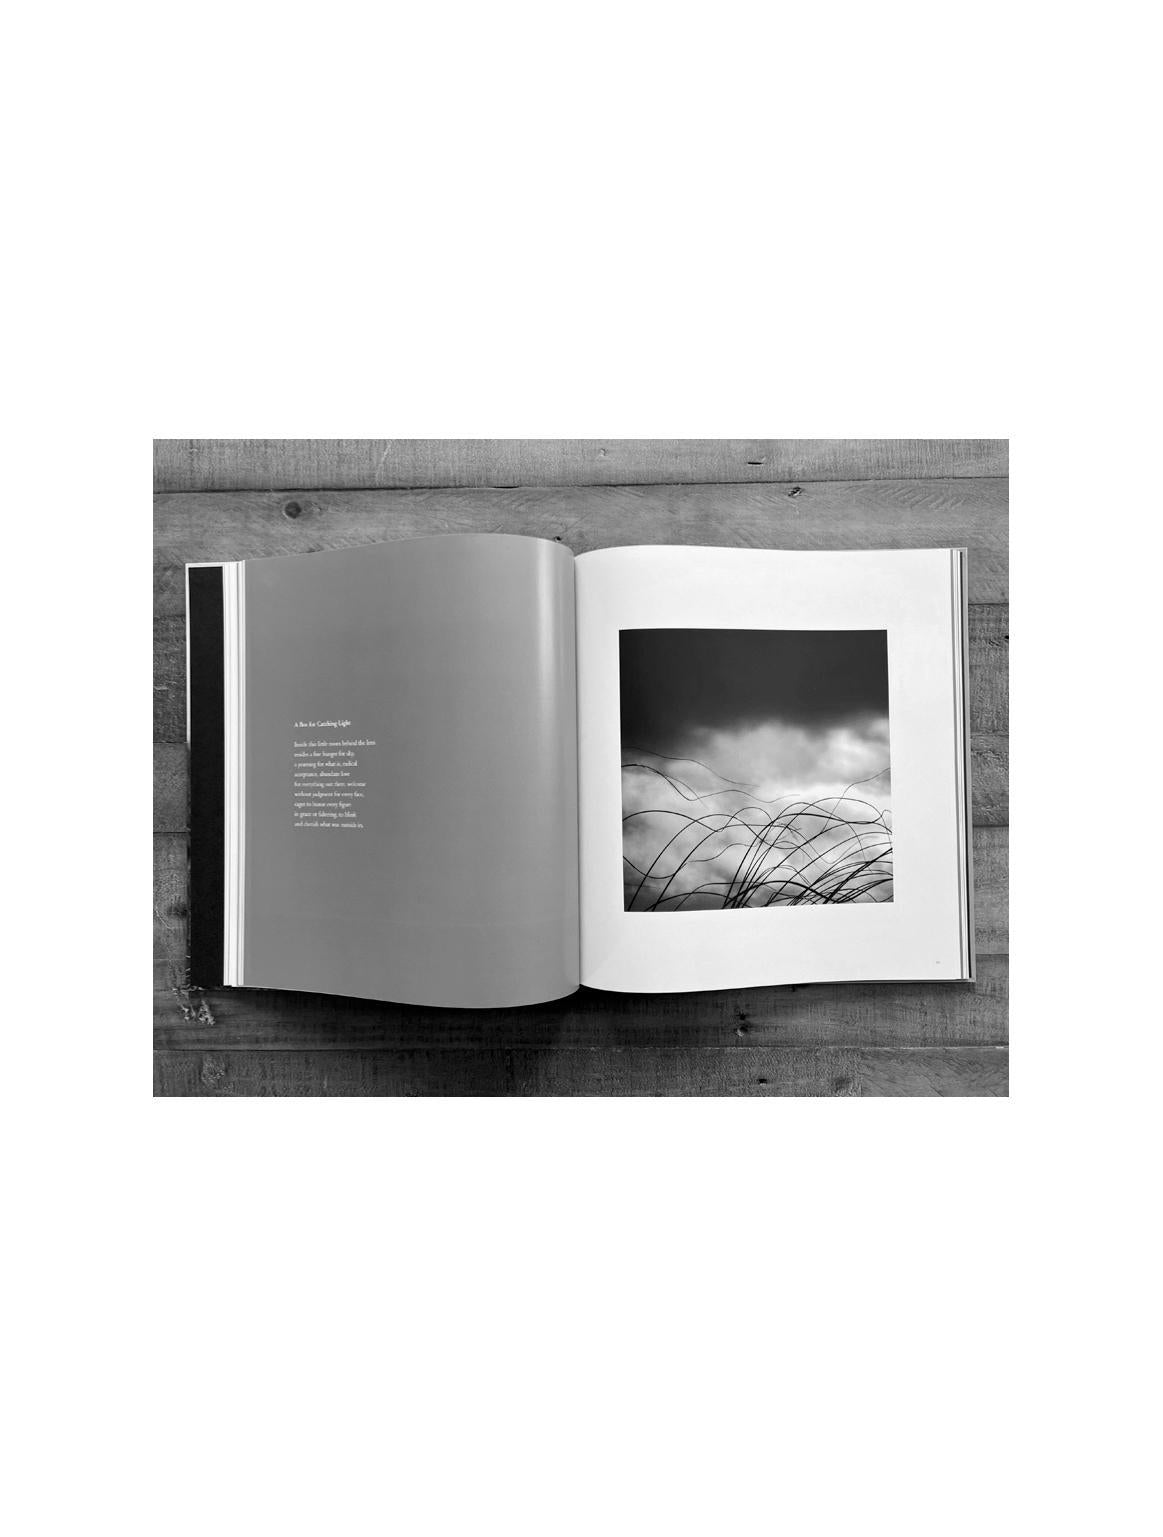 Book (Signed Edition) - Photography: "I Hope You Find What You're Looking For"